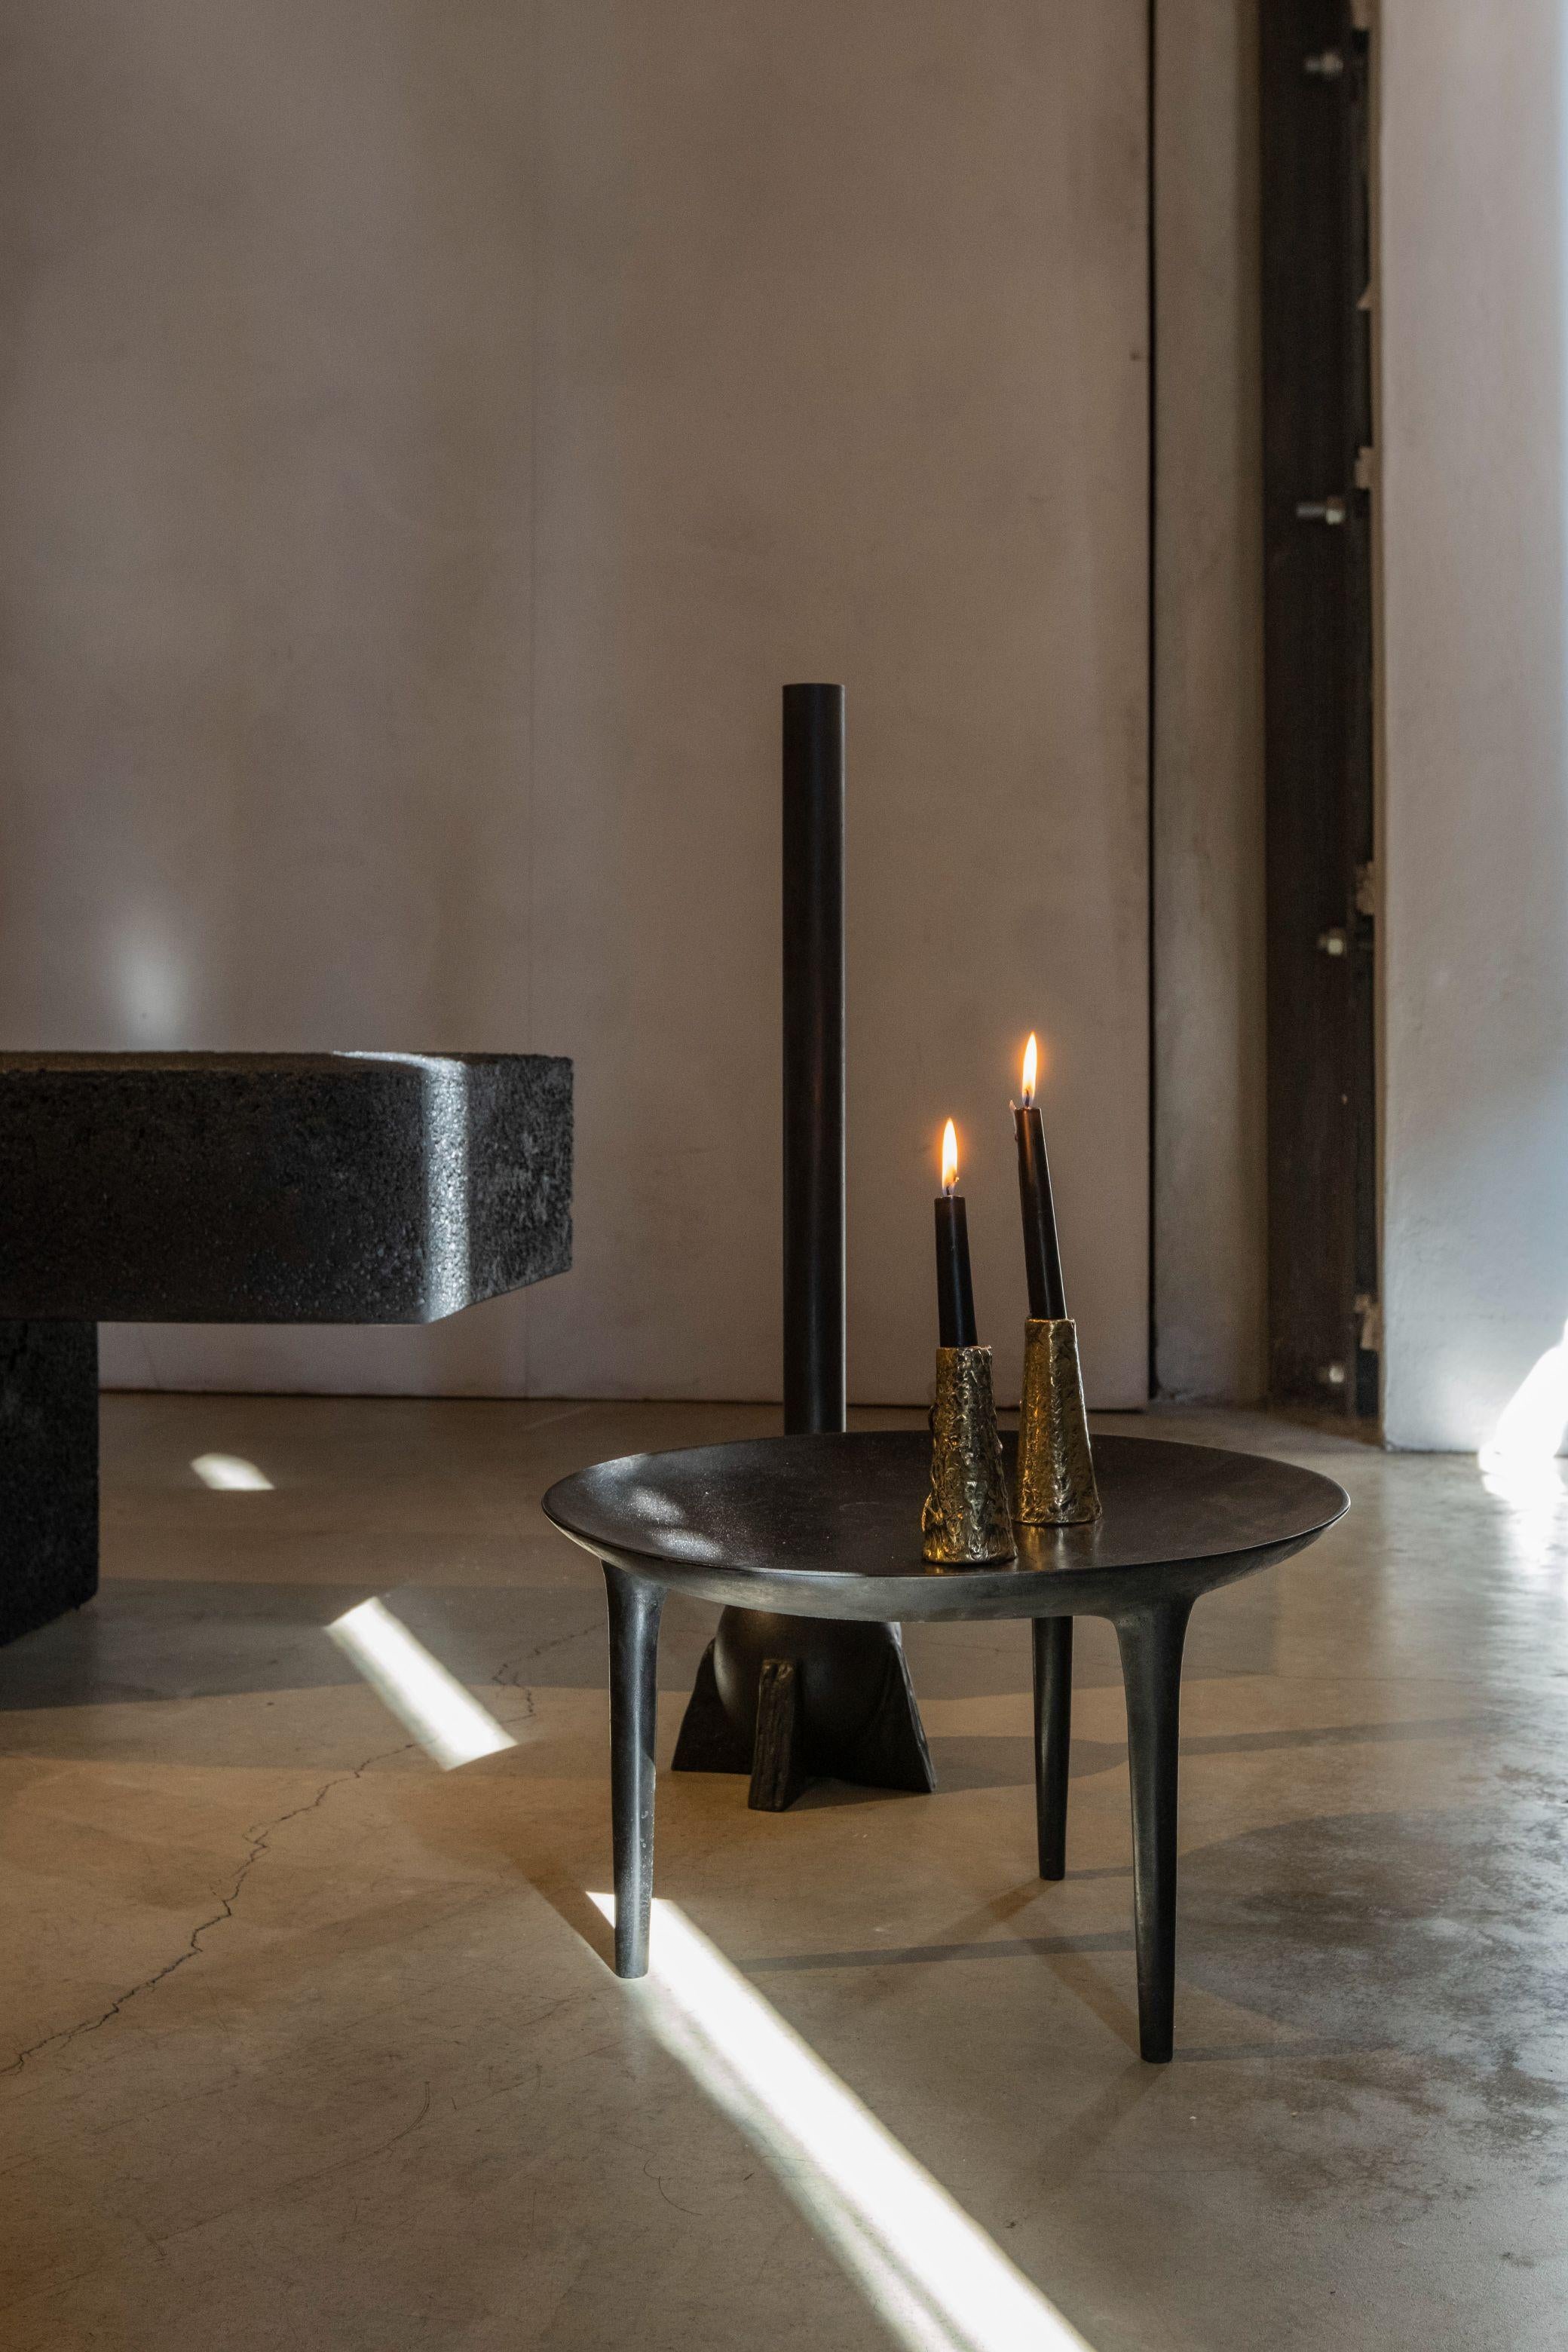 Ensemble of Brass Hand-Sculpted Candleholders by Samuel Costantini 5